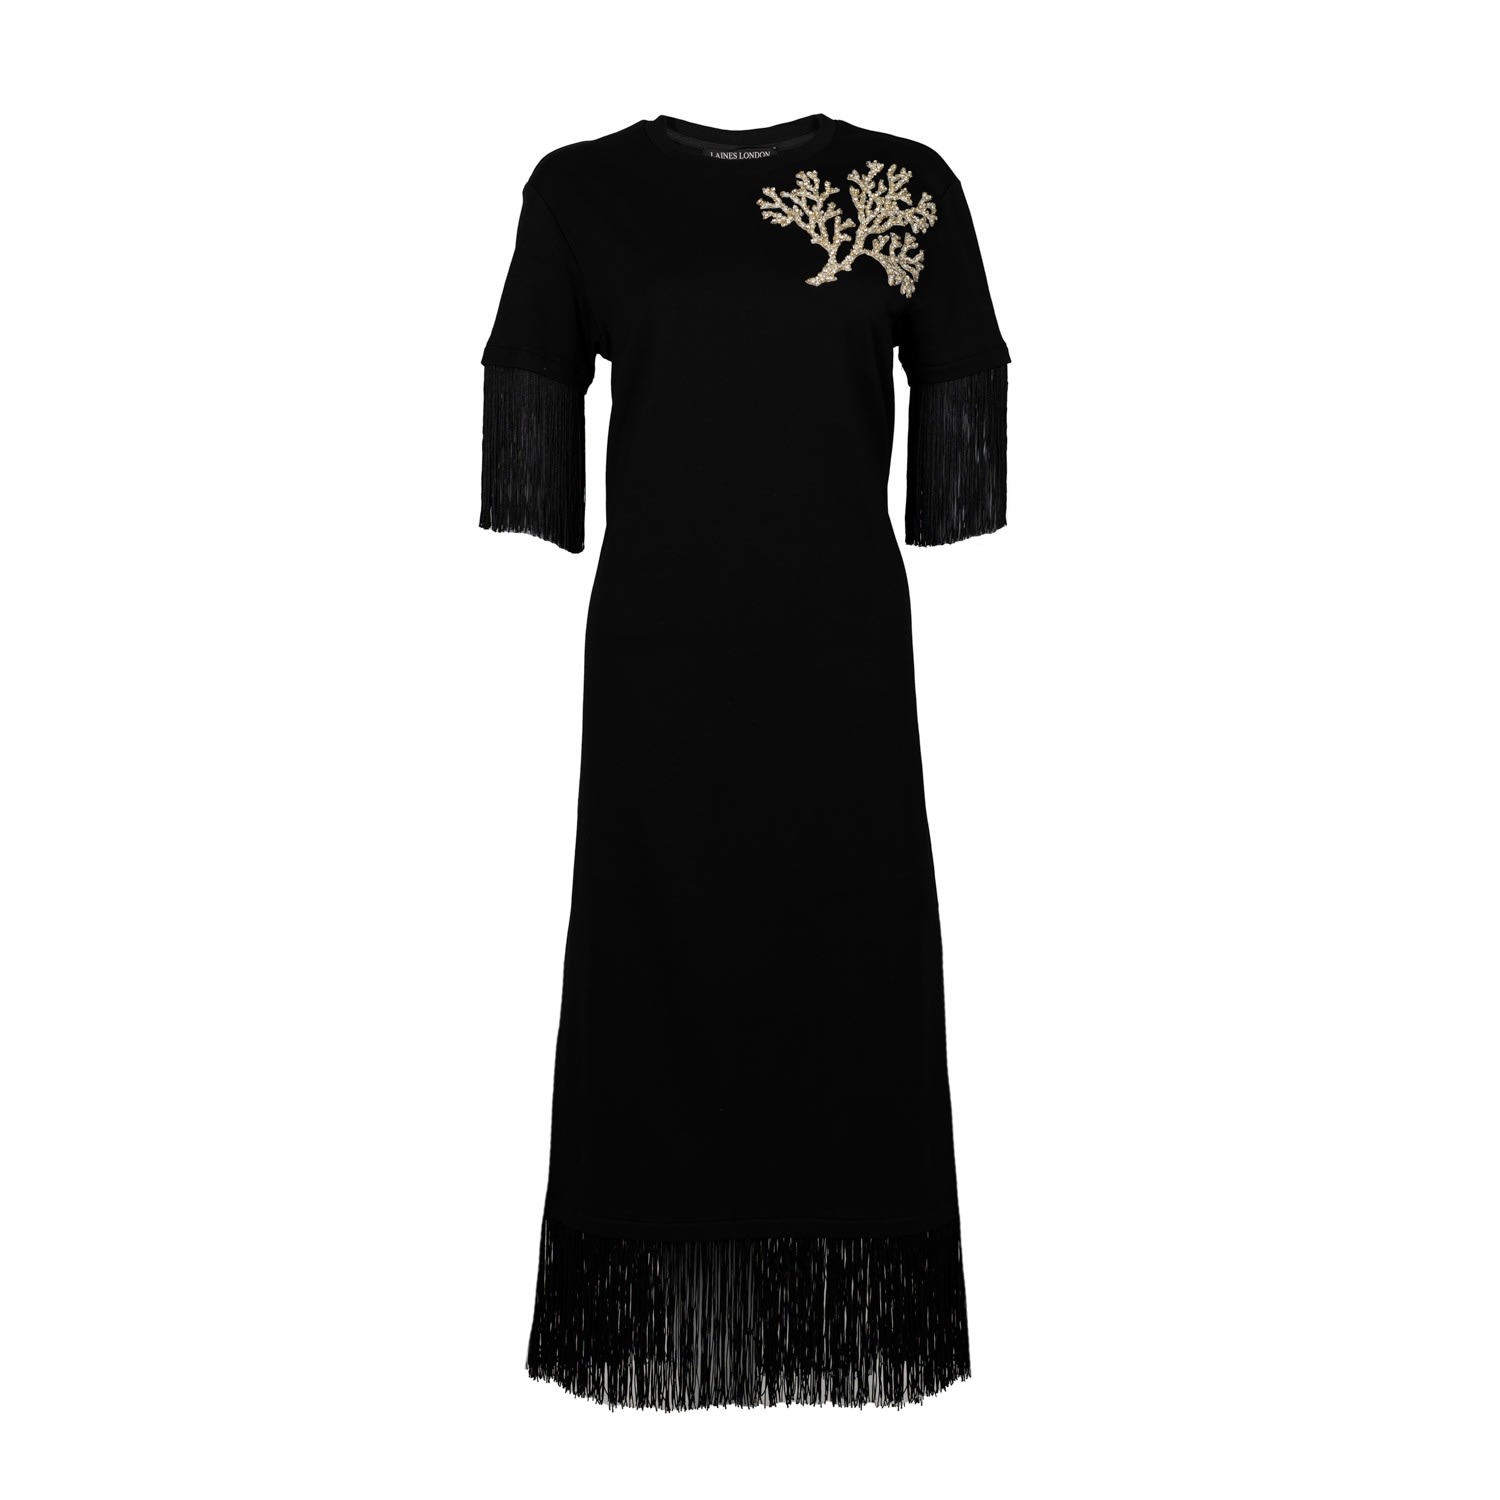 Women’s Laines Couture Fringed Tassel Dress With Embellished Coral - Black S/M Laines London